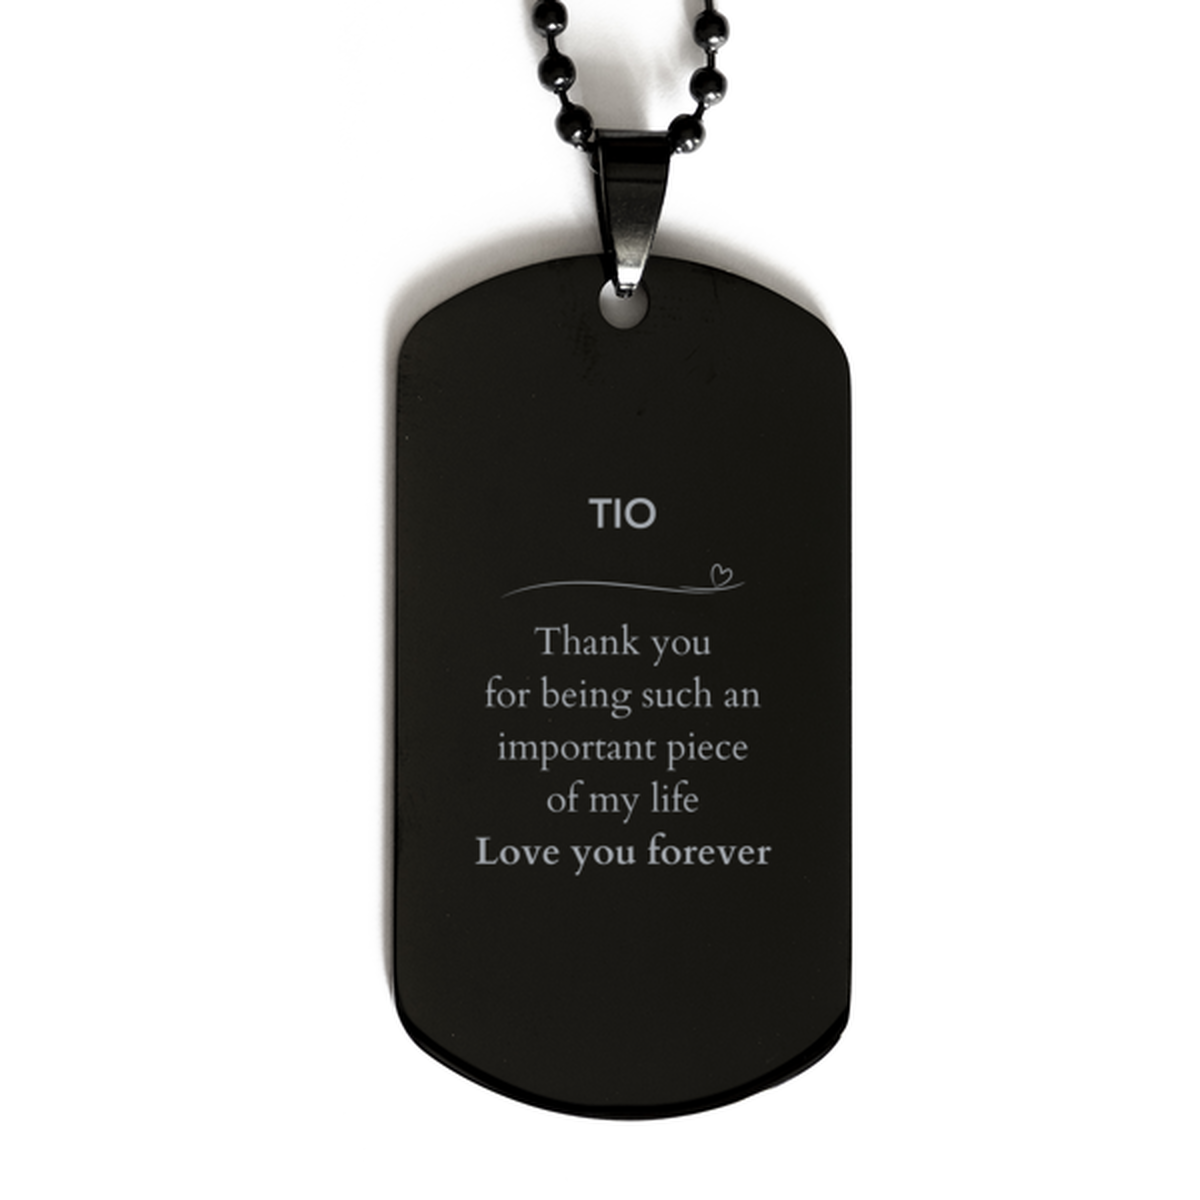 Appropriate Tio Black Dog Tag Epic Birthday Gifts for Tio Thank you for being such an important piece of my life Tio Christmas Mothers Fathers Day